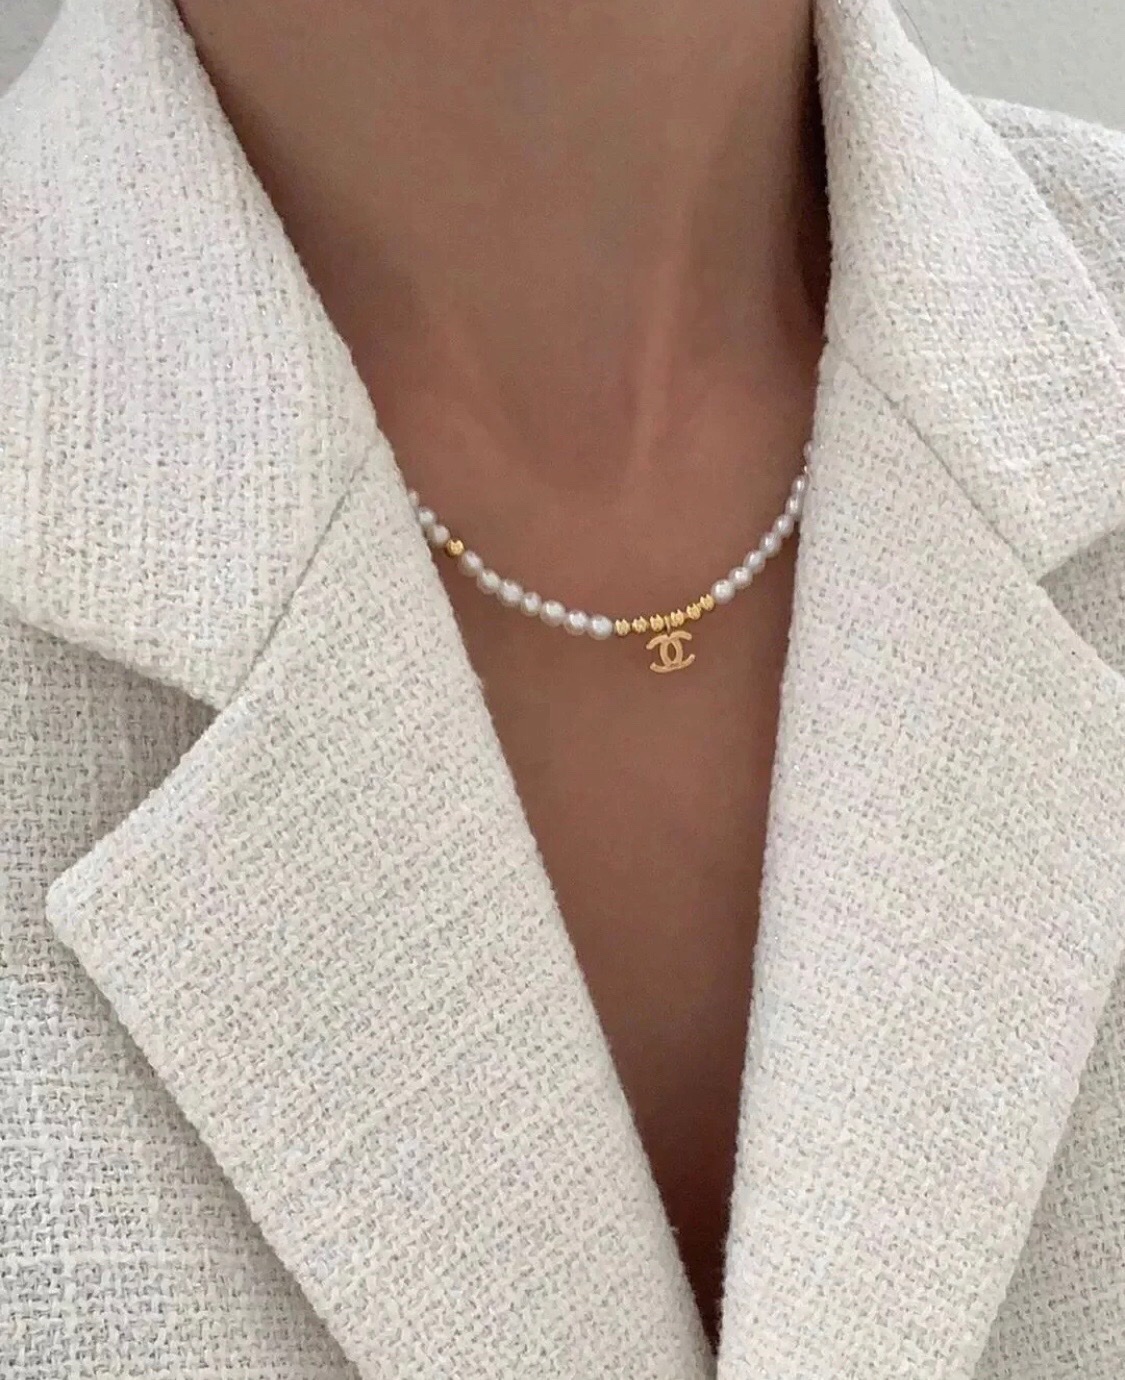 X446 Chanel necklace